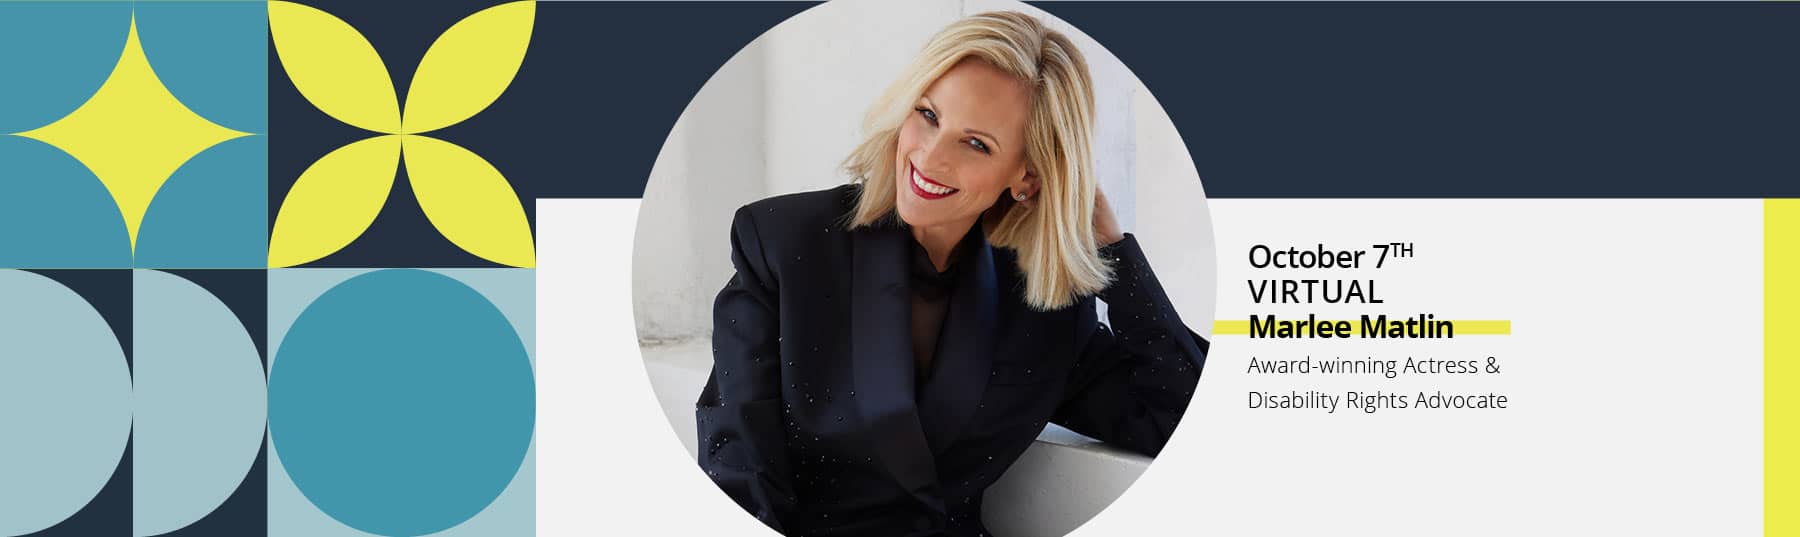 Join Marlee Matlin on October 7th at the virtual Pennsylvania Conference for Women